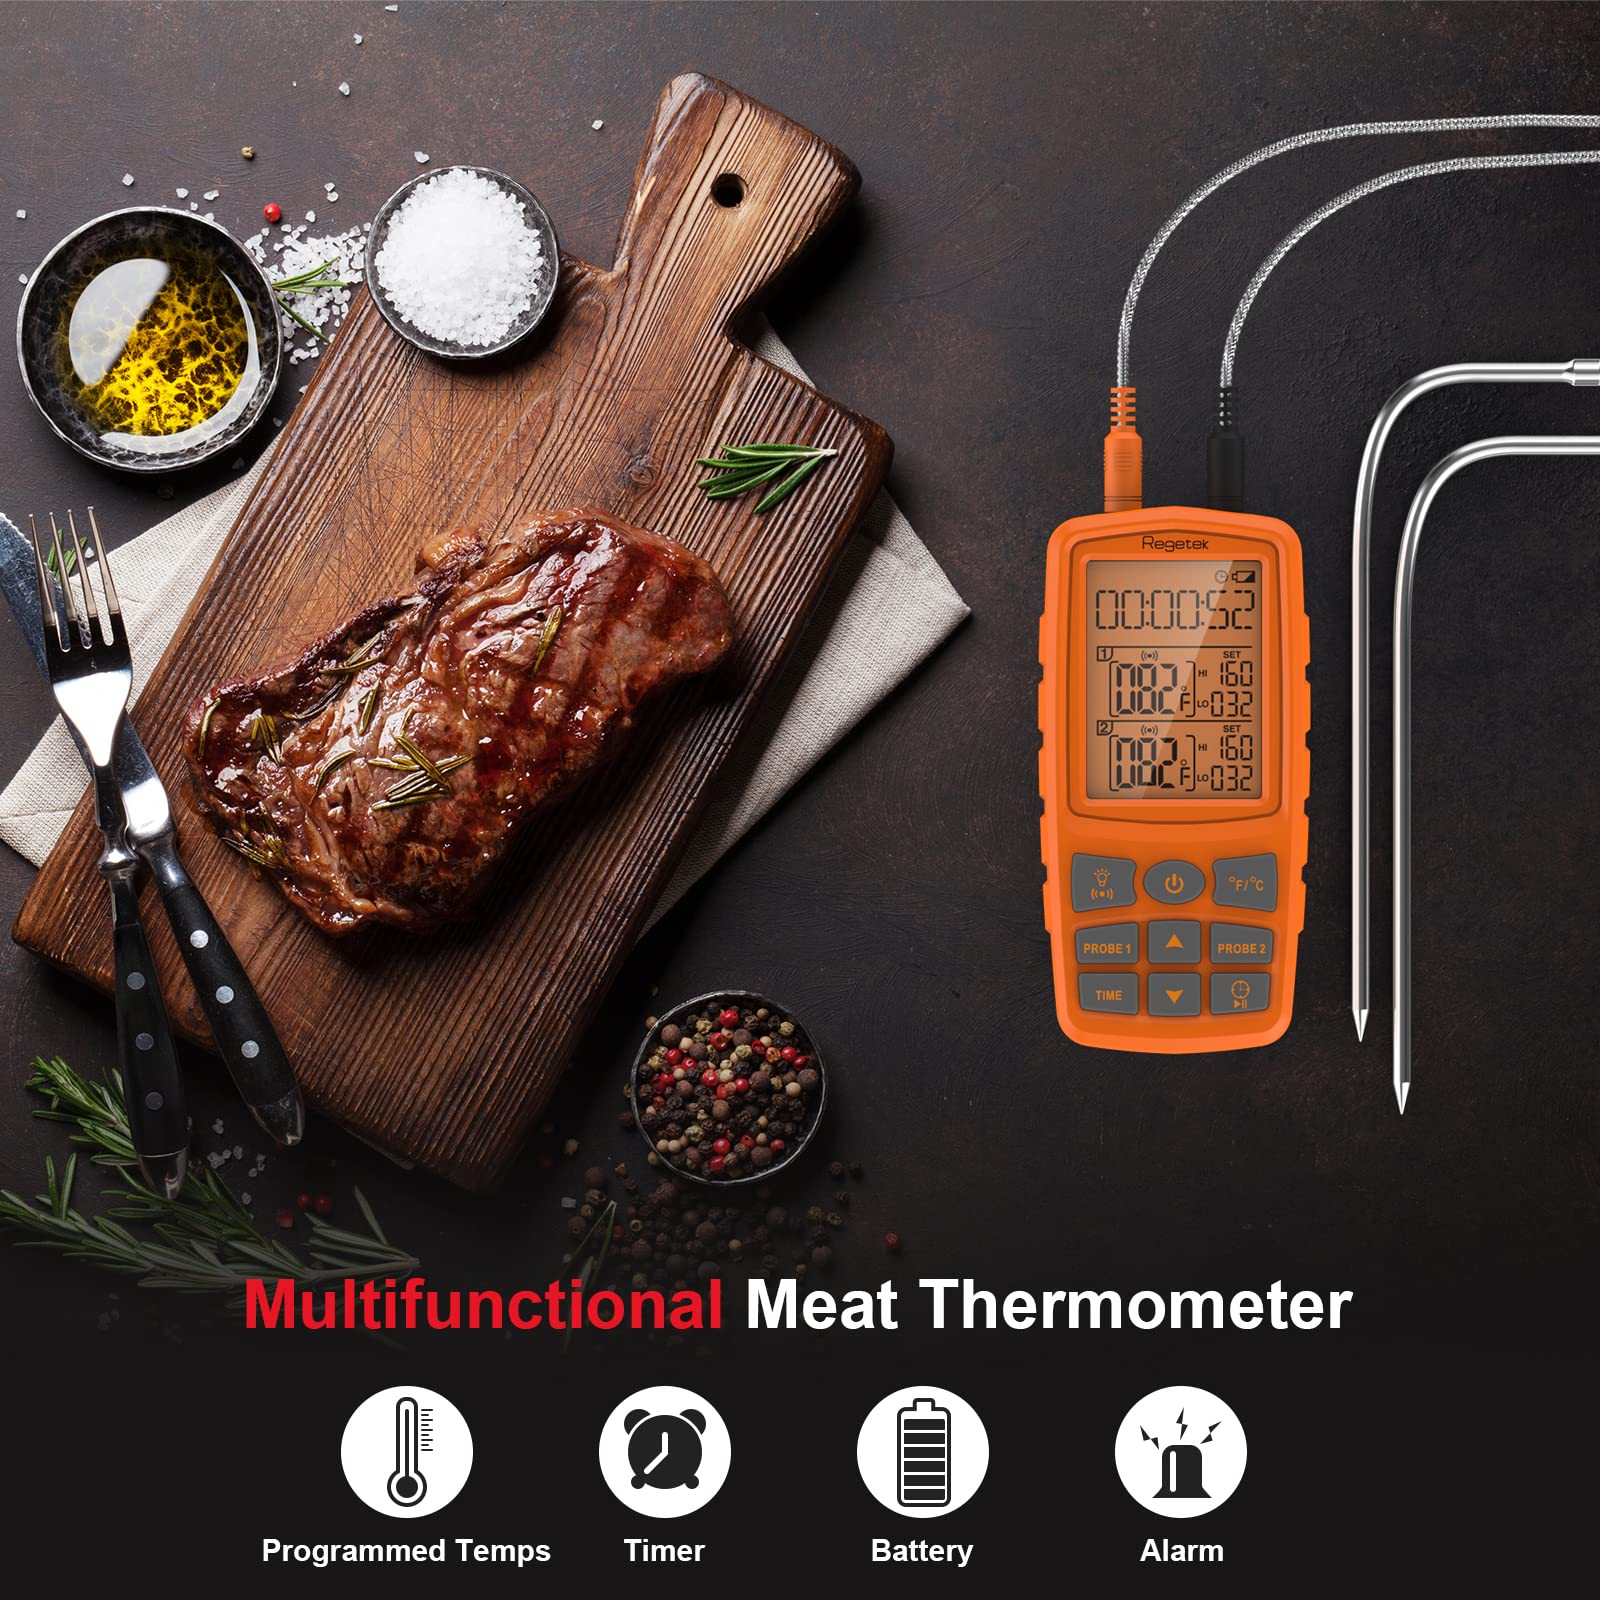 Regetek Meat Thermometer Cooking Food Smoker Oven Kitchen BBQ Grill Thermometer(High Low Temp Alert) Dual Probe Digital Backlight Cooking Thermometer for Turkey Fish Beef RA60